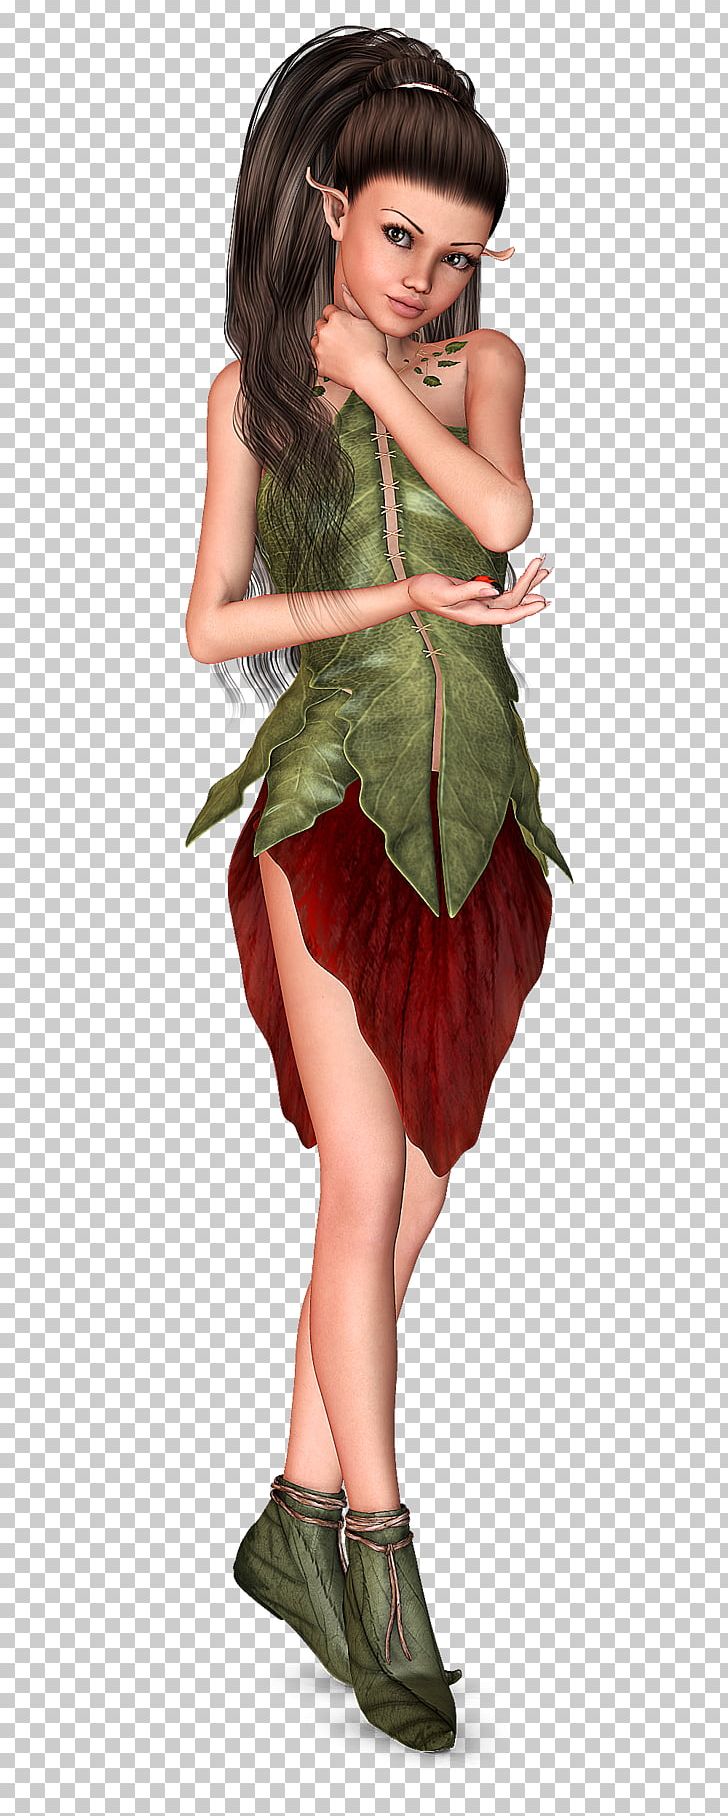 Fairy Tale Elf PNG, Clipart, Brown Hair, Clip Art, Costume, Costume Design, Drawing Free PNG Download